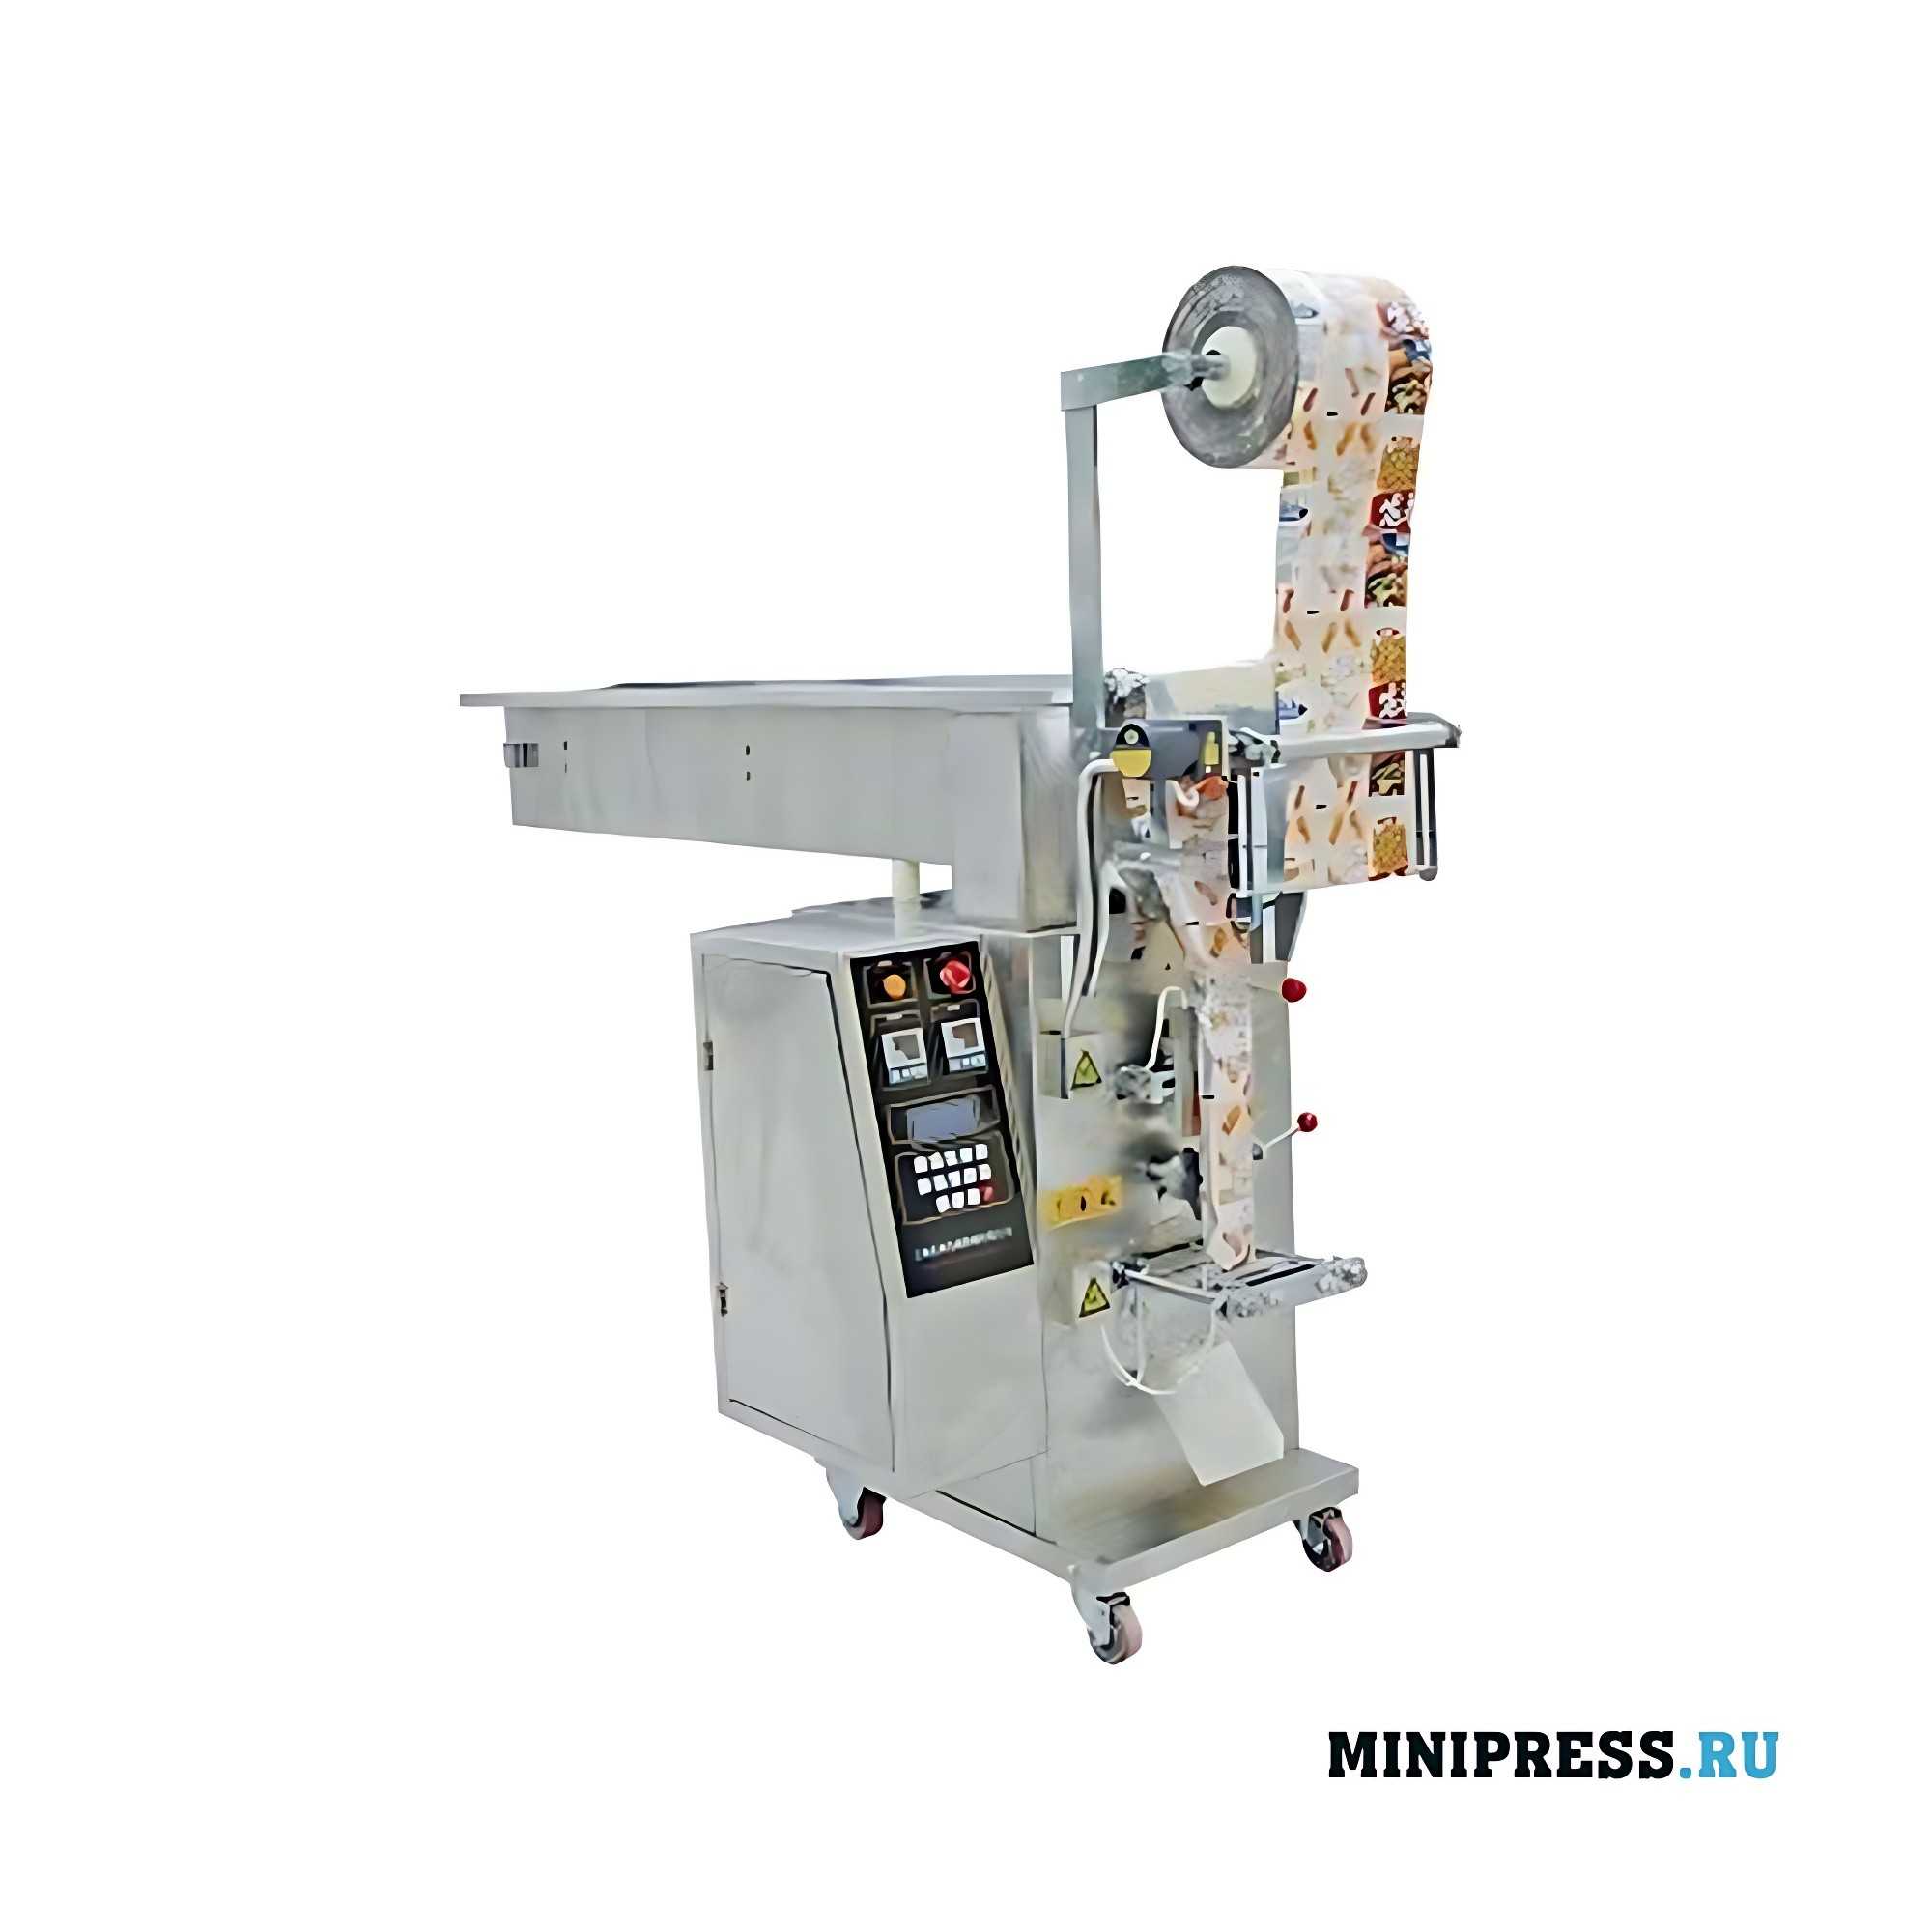 Automatic packaging equipment with underground bunker SZP 10